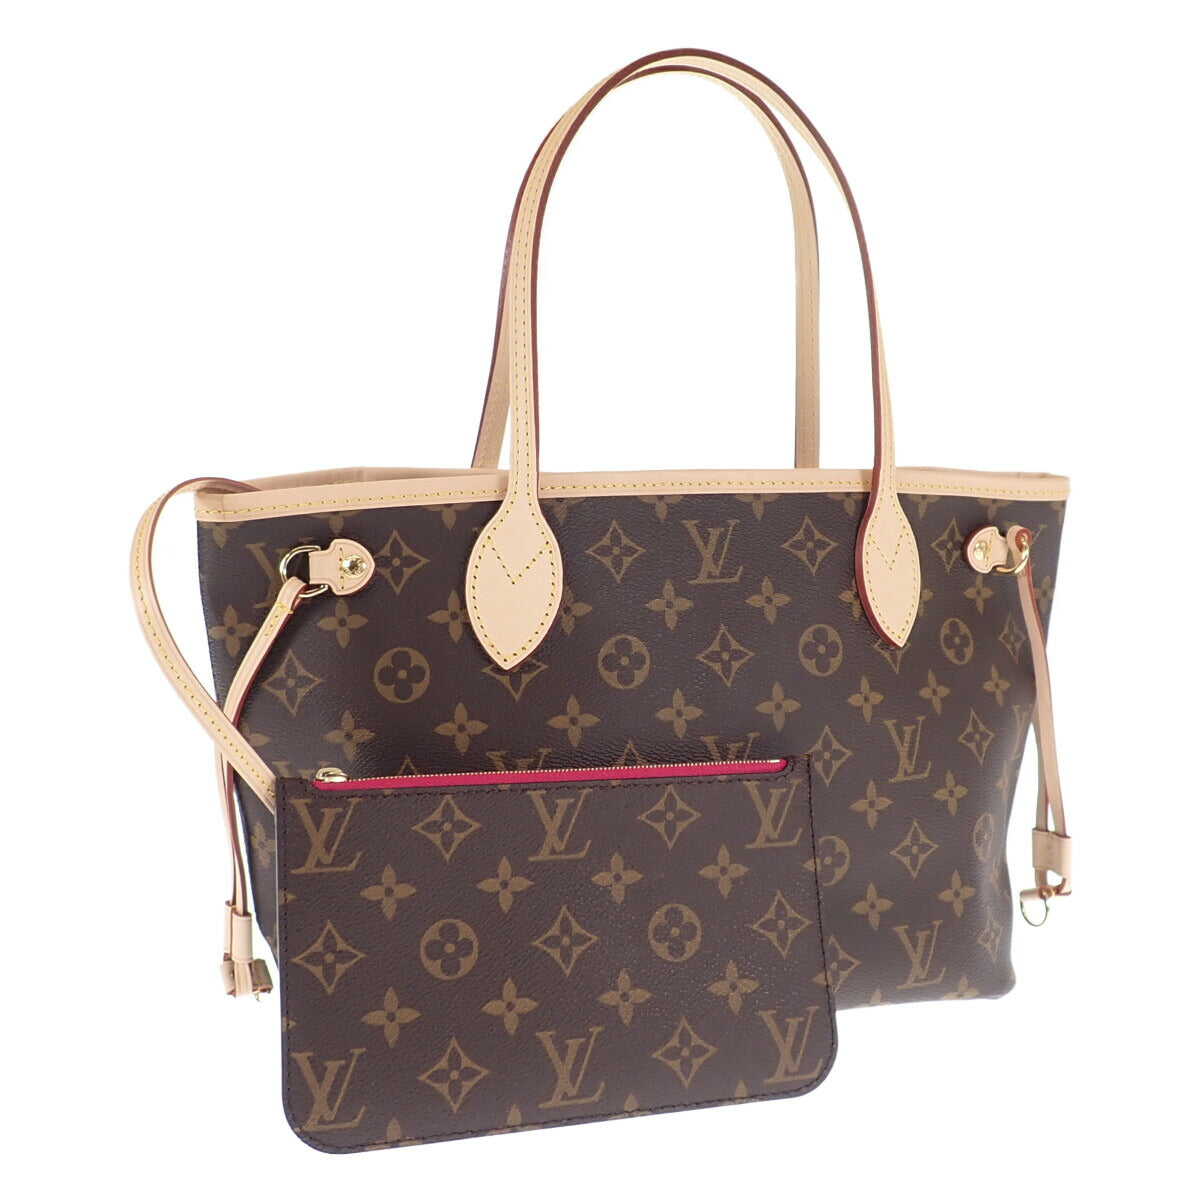 Louis Vuitton Neverfull PM Canvas Tote Bag M41245 in Excellent condition